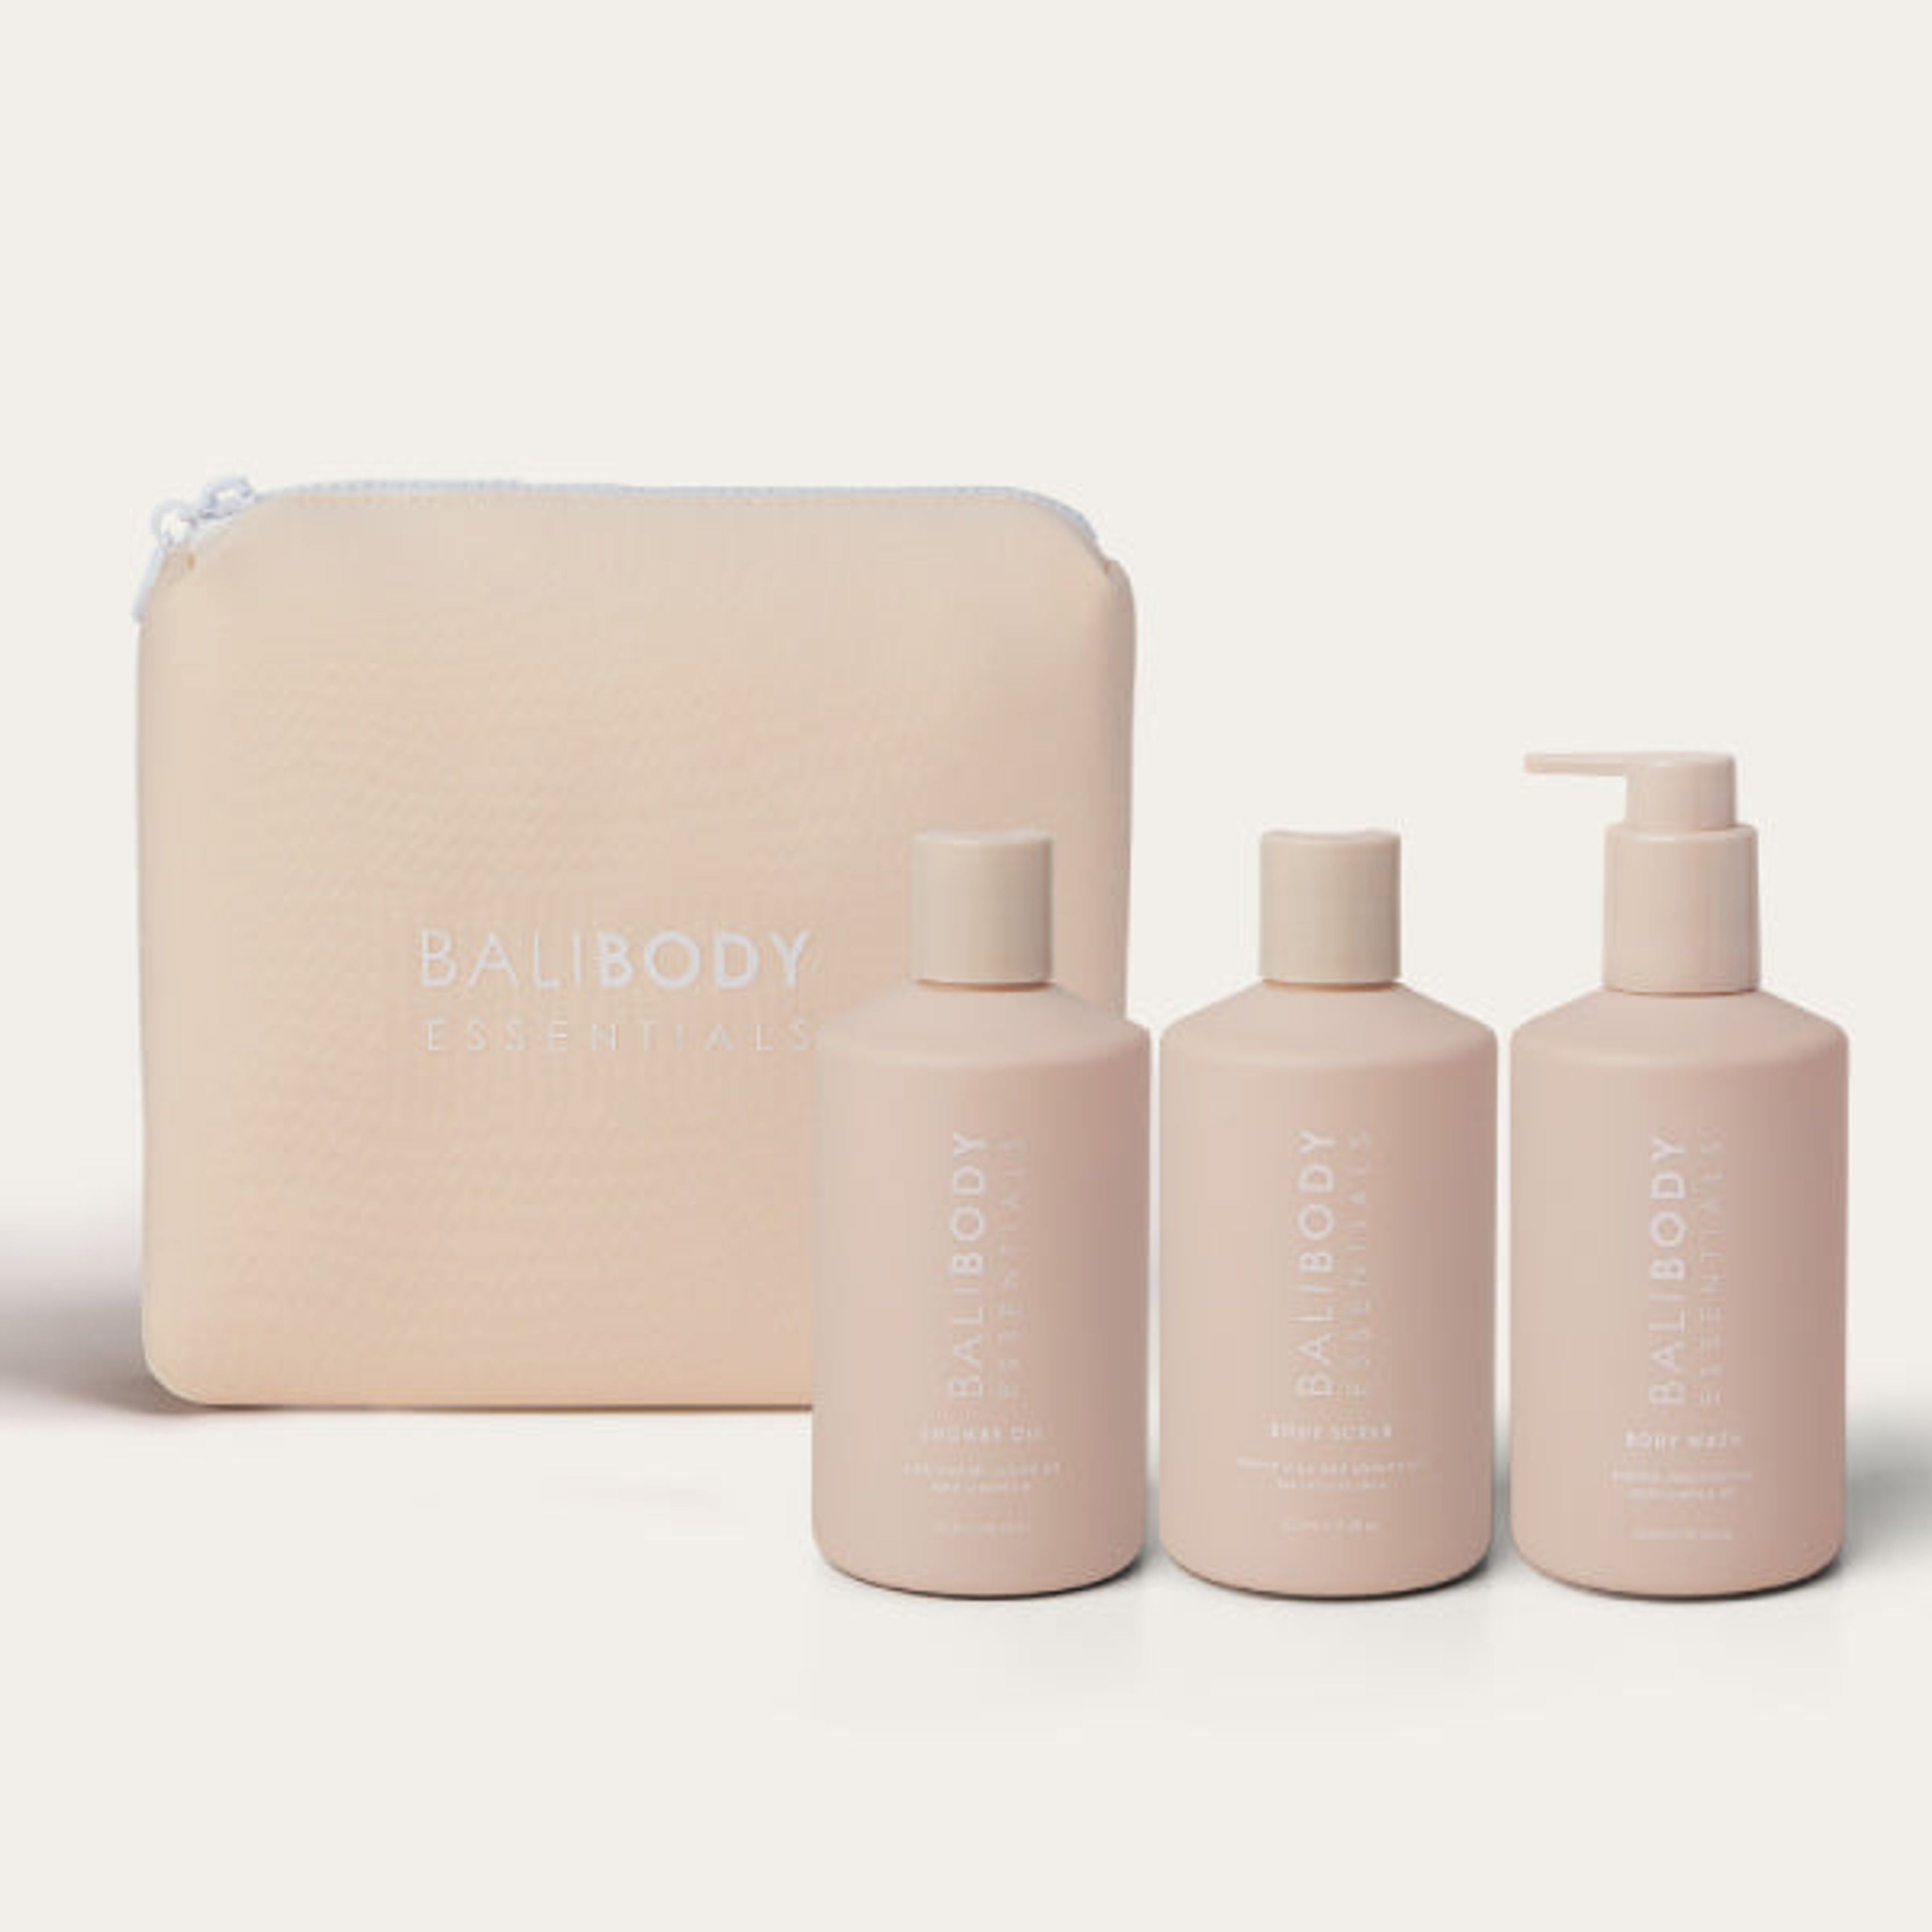 Daily Luxe Bundle